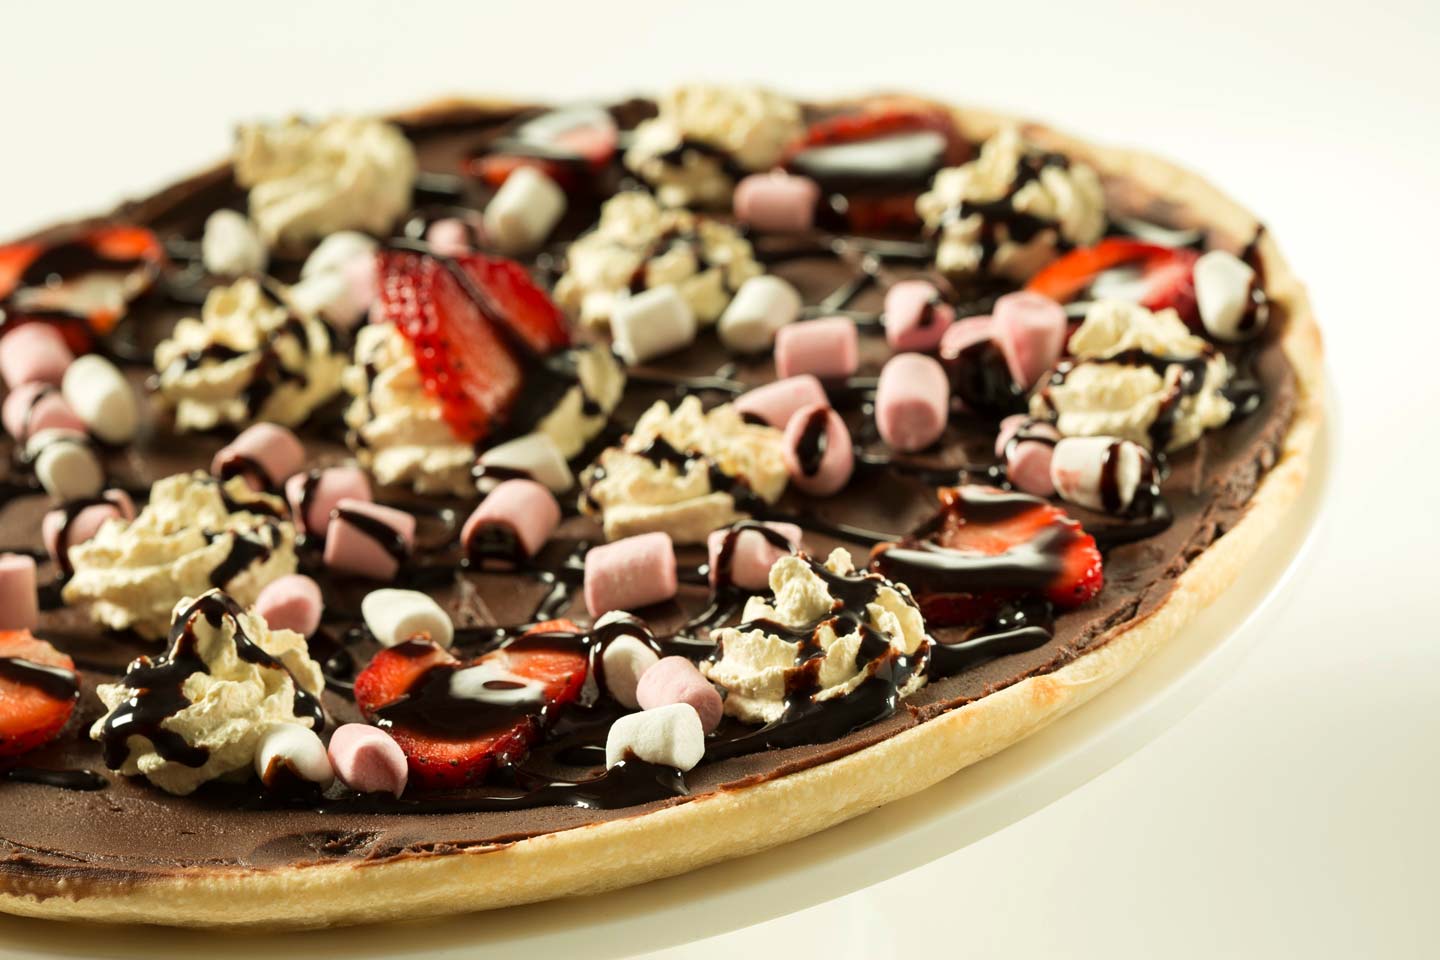 🍪 Say “Yuck” Or “Yum” to These Chocolatey Treats and We’ll Guess Your Zodiac Sign Chocolate pizza